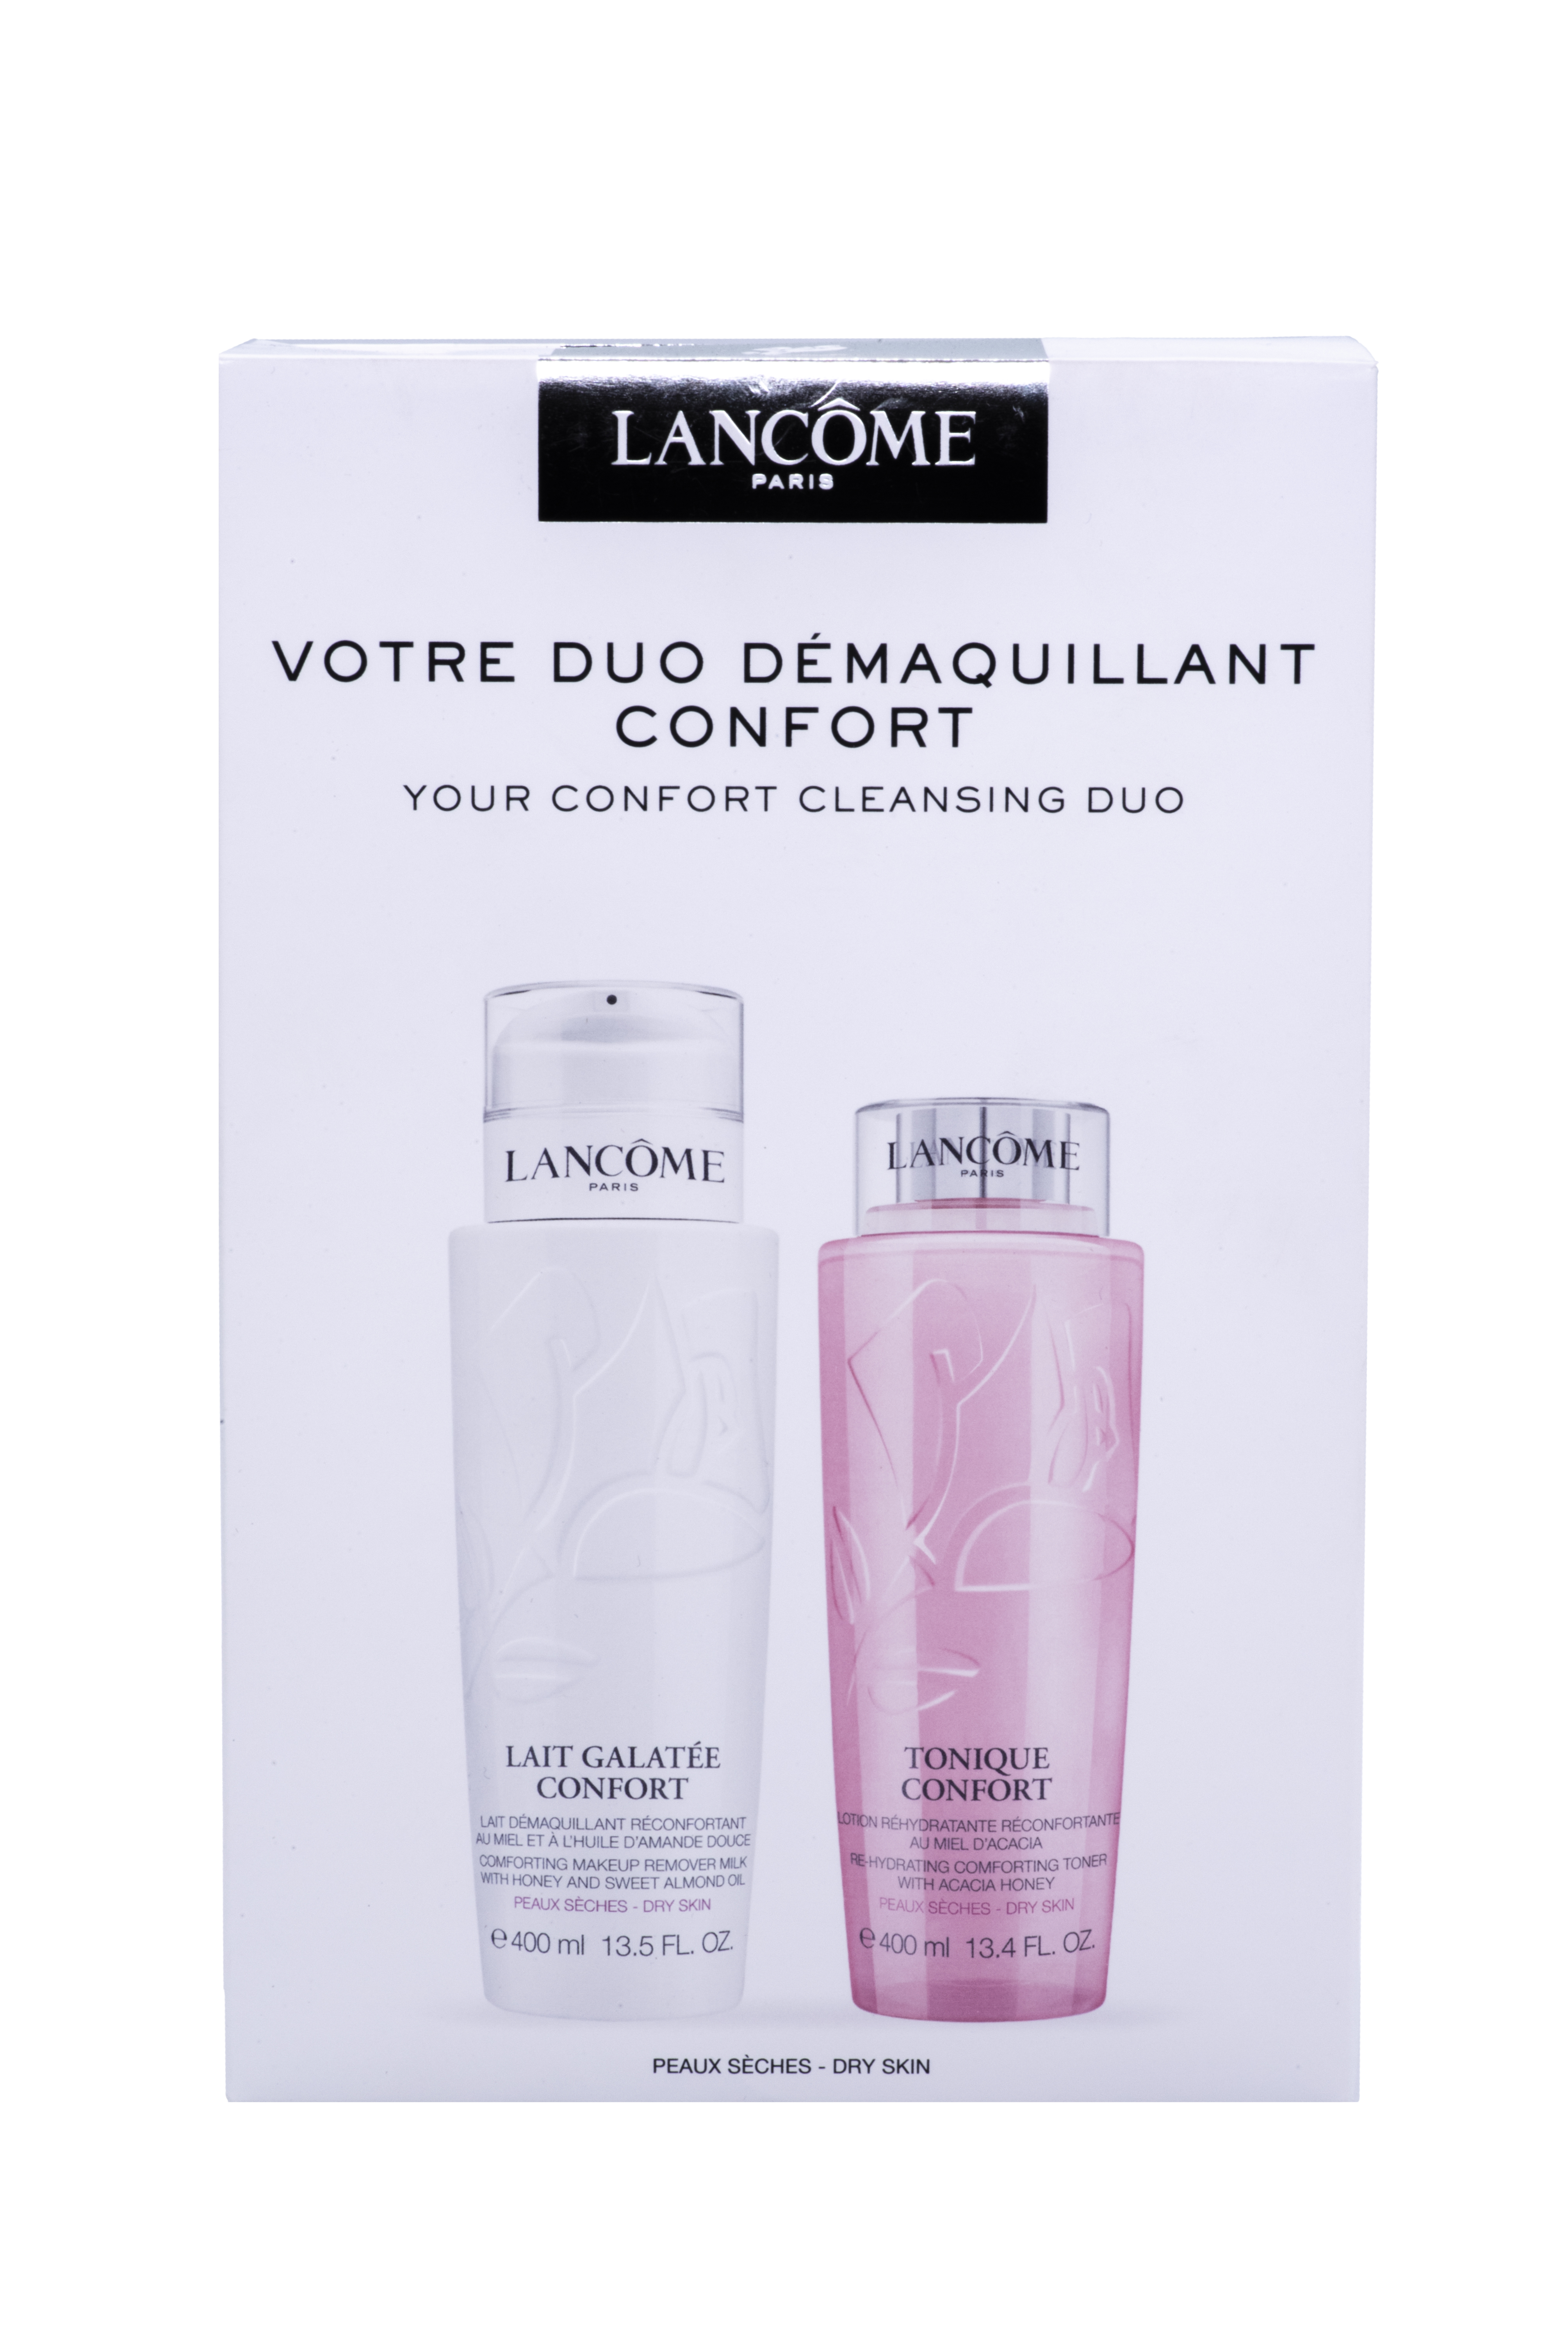 Lancome Confort Duo Box. Removes make-up and moisturizes dry skin. For gently purified skin - image 1 of 2